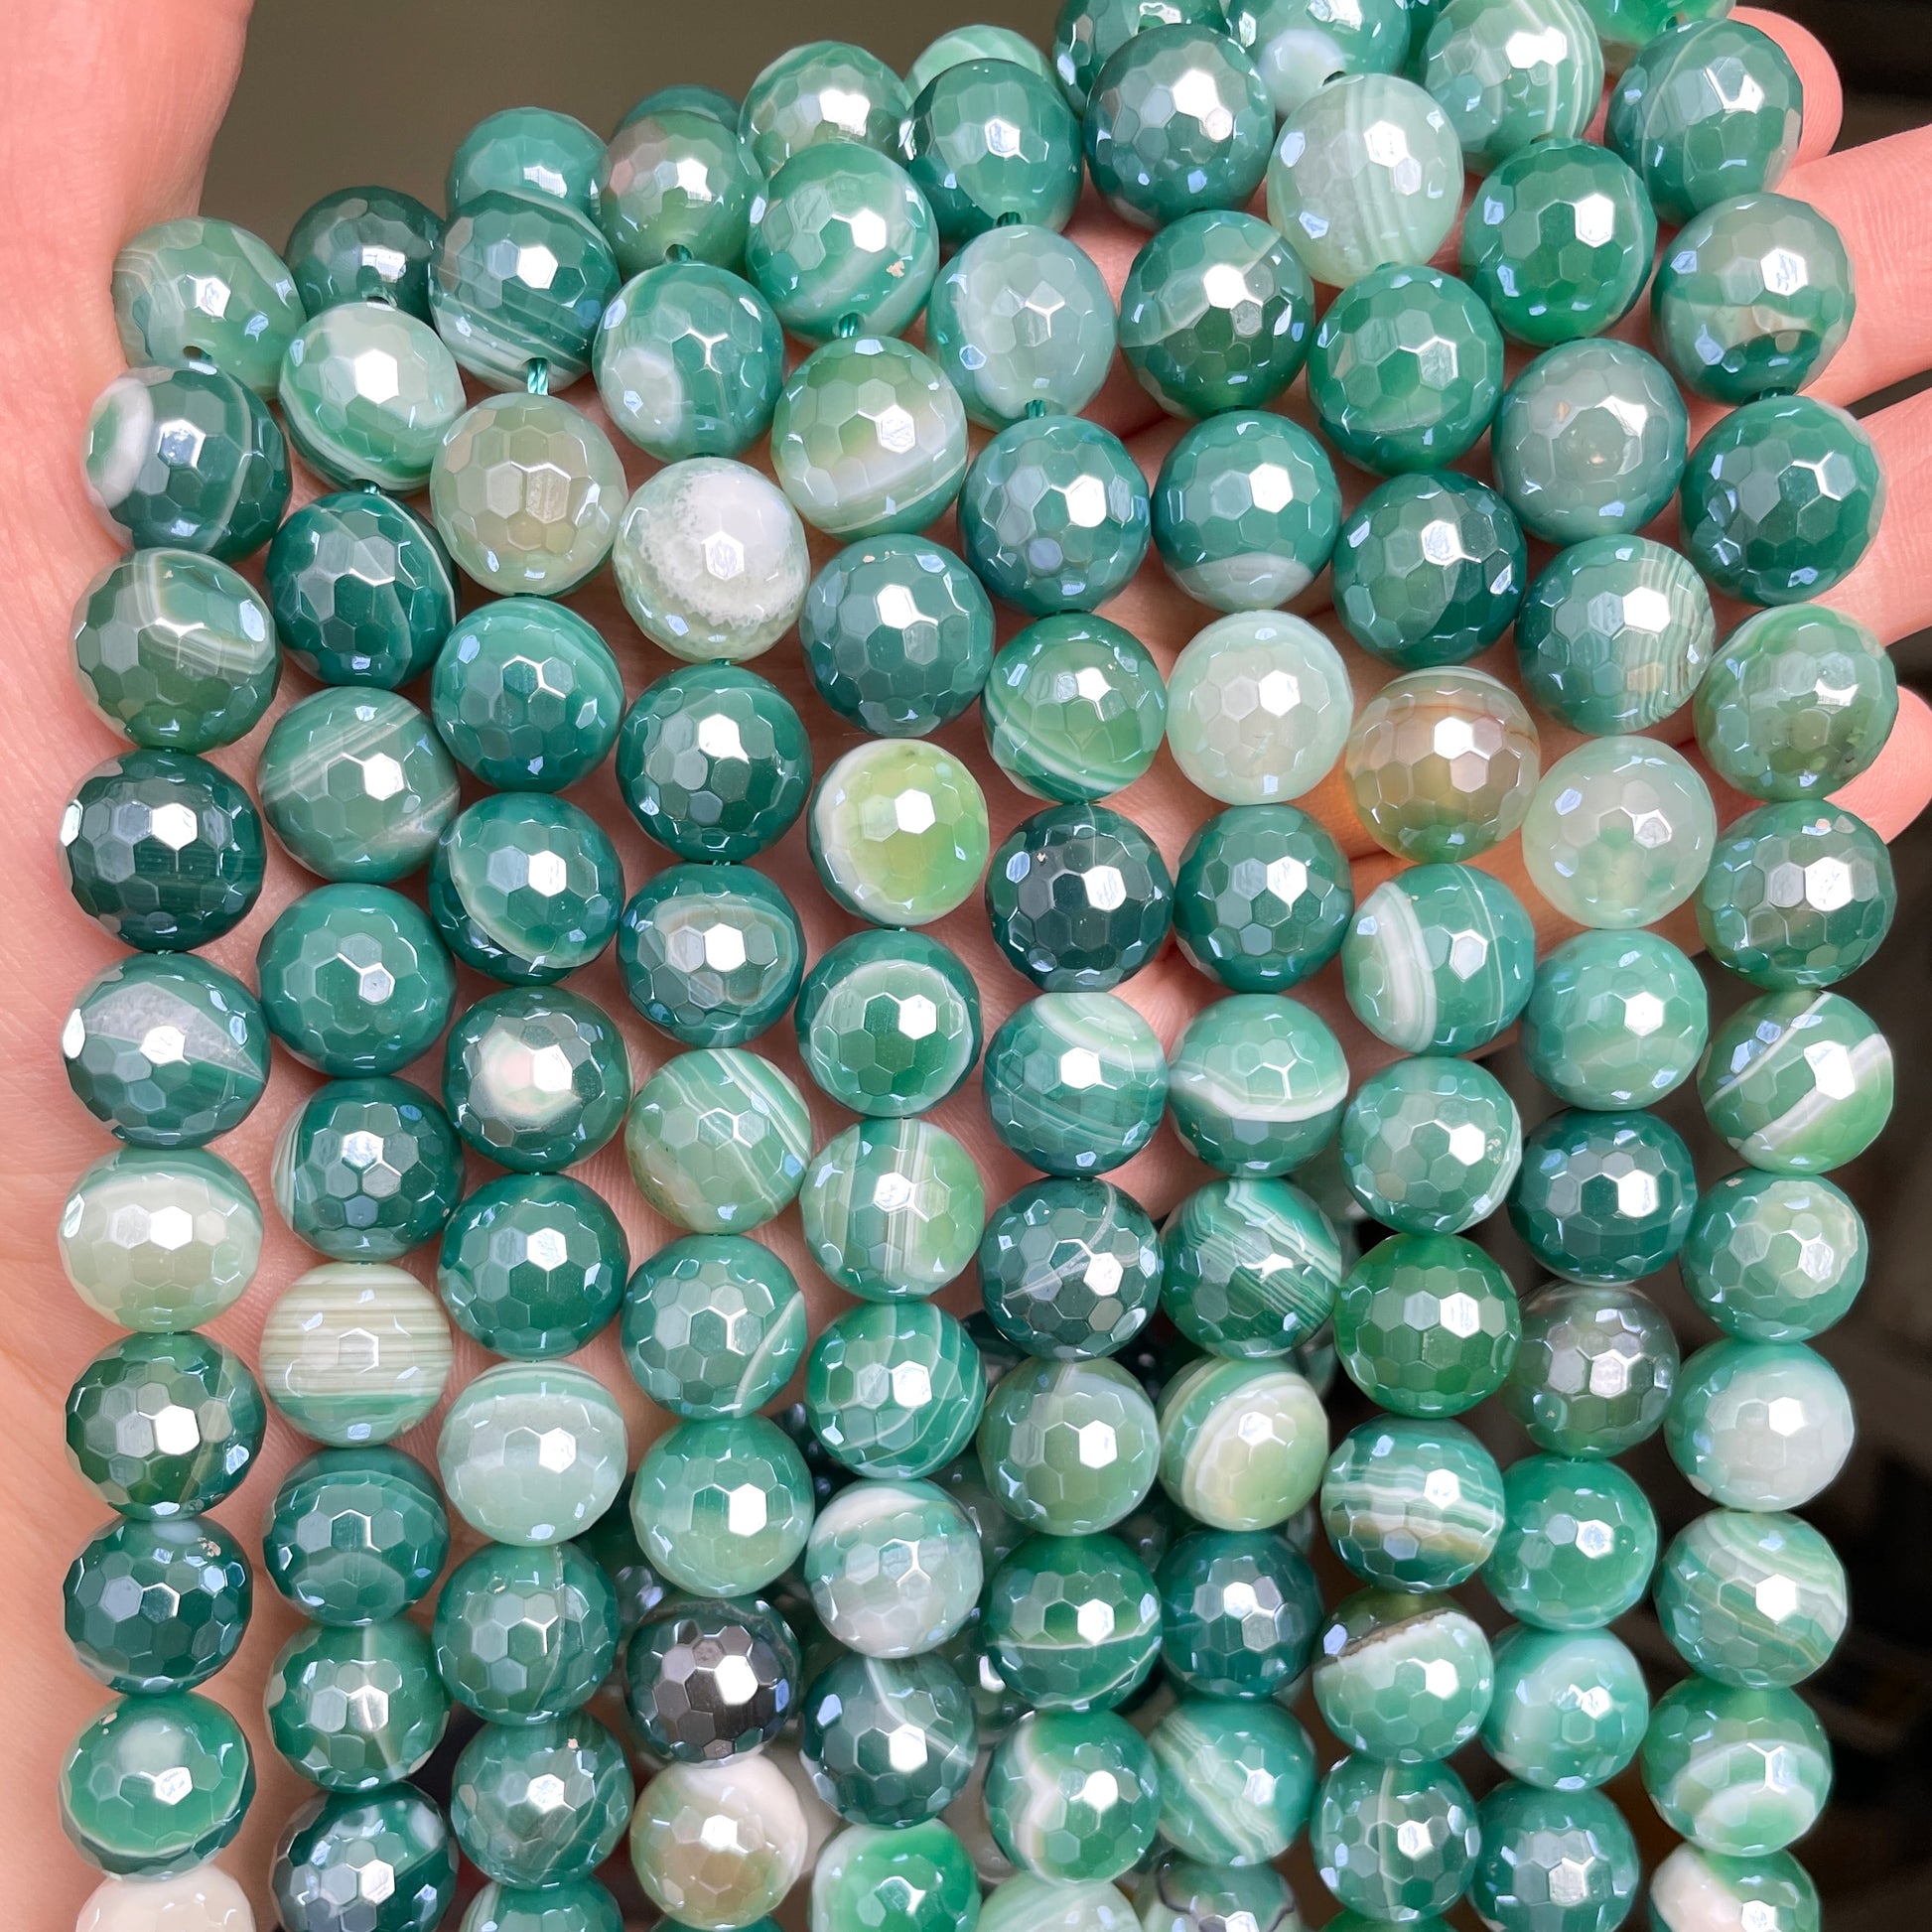 10, 12mm Electroplated Green Banded Agate Stone Faceted Beads-Grade A Premium Quality Electroplated Beads 12mm Stone Beads New Beads Arrivals Premium Quality Agate Beads Charms Beads Beyond